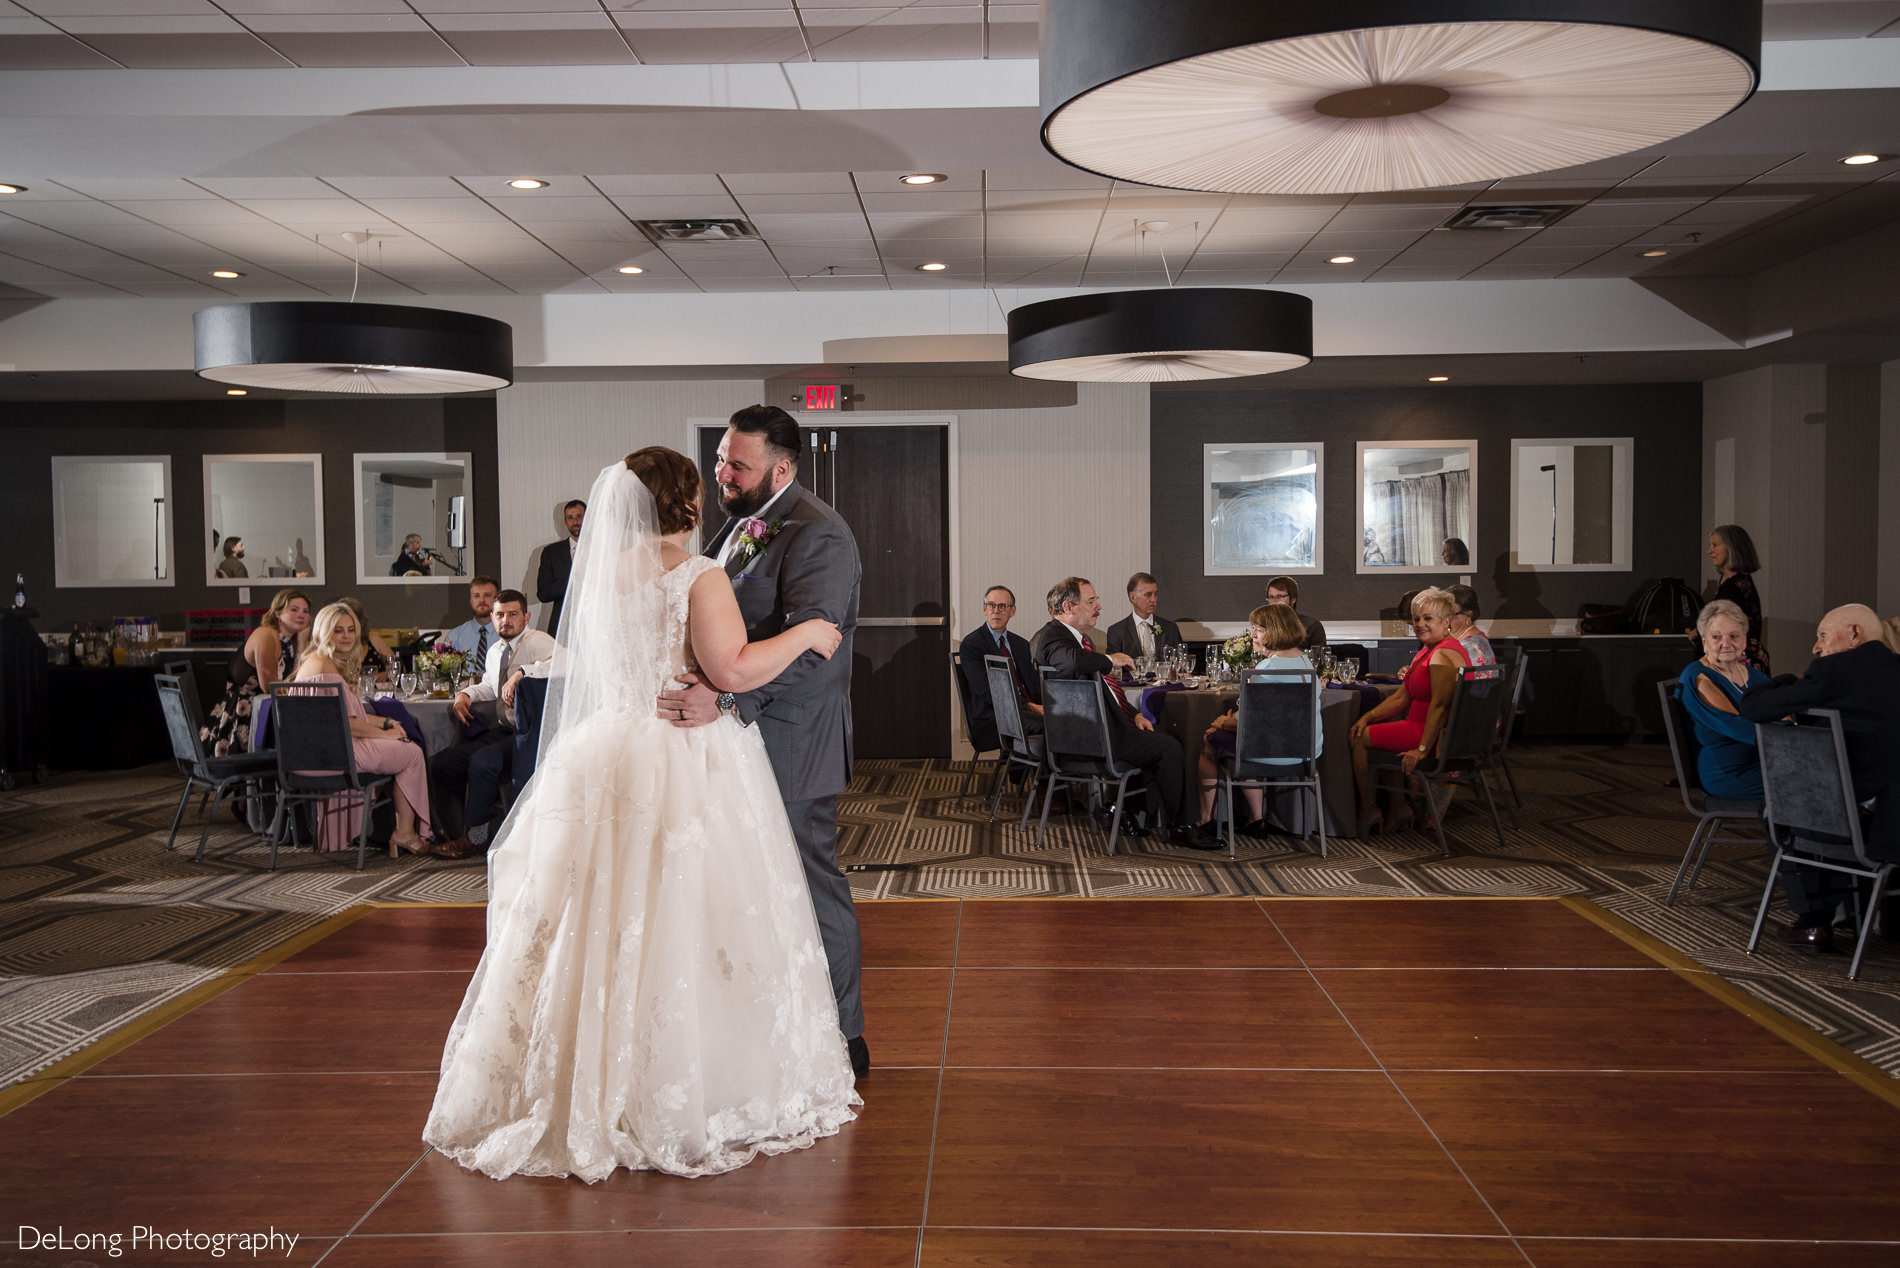 Bride and groom first dance image at the Embassy Suites by Hilton Charlotte by Charlotte wedding photographers DeLong Photography